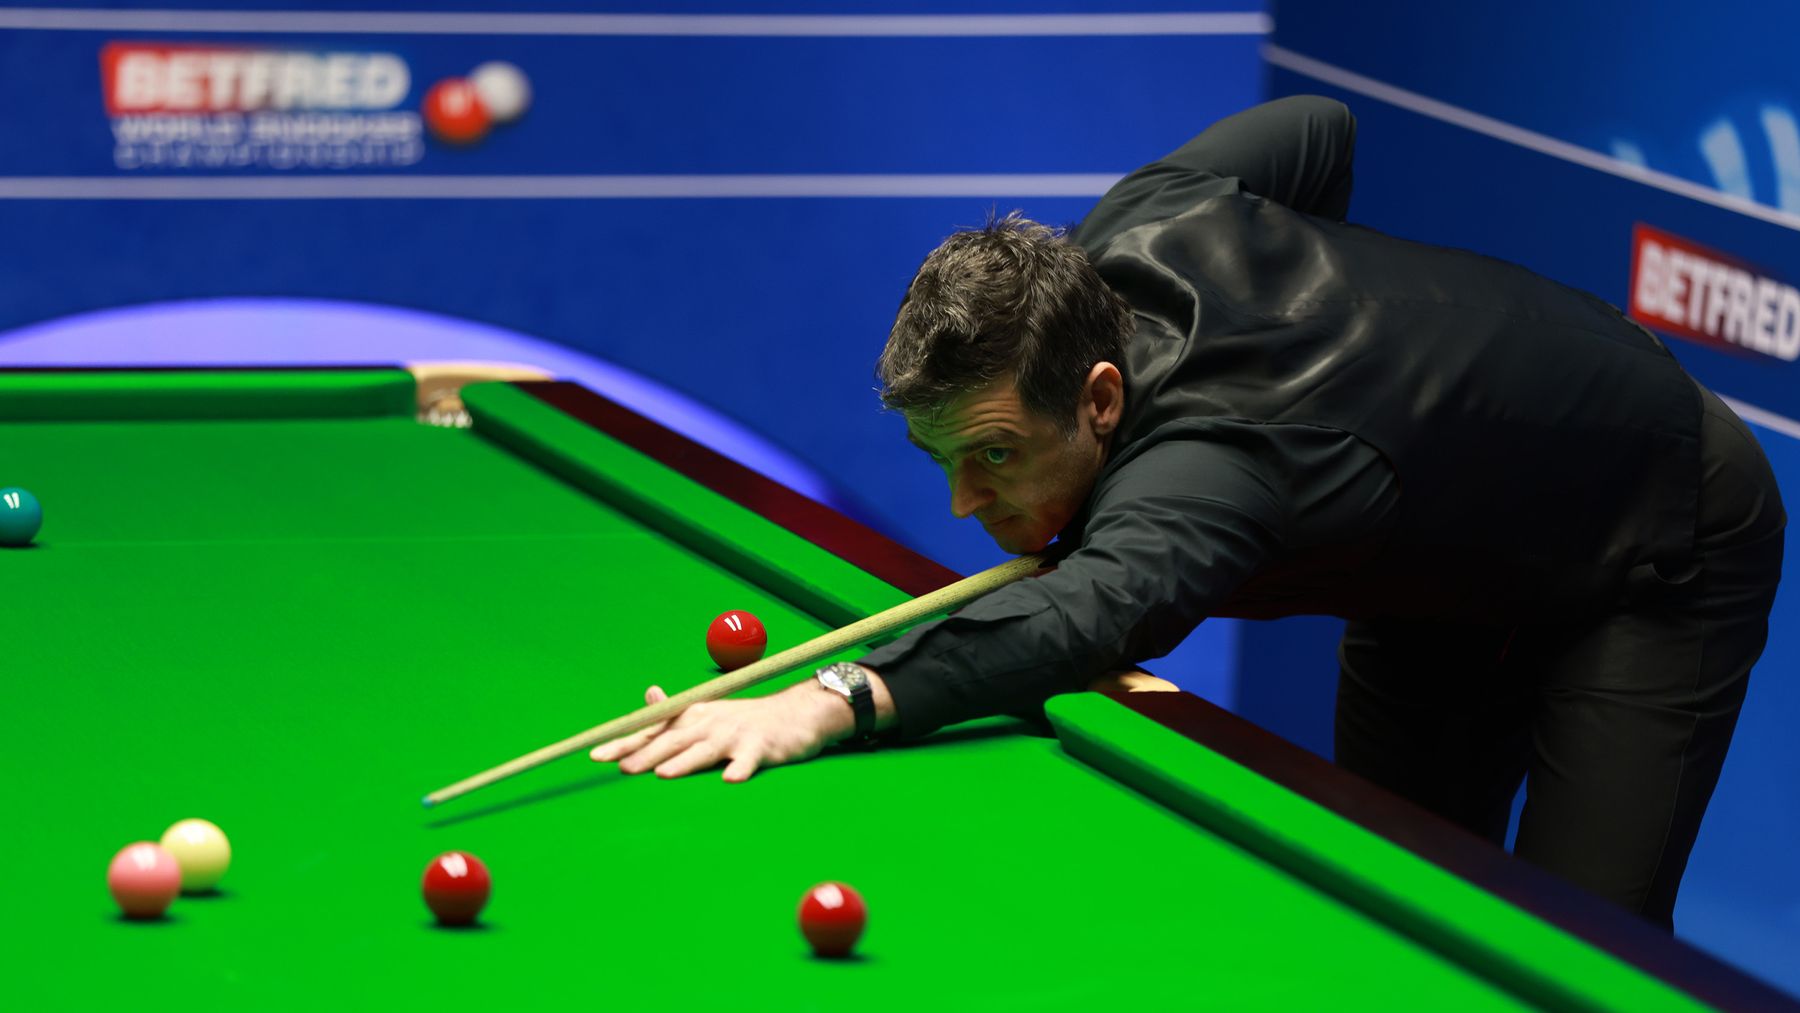 flash snooker results